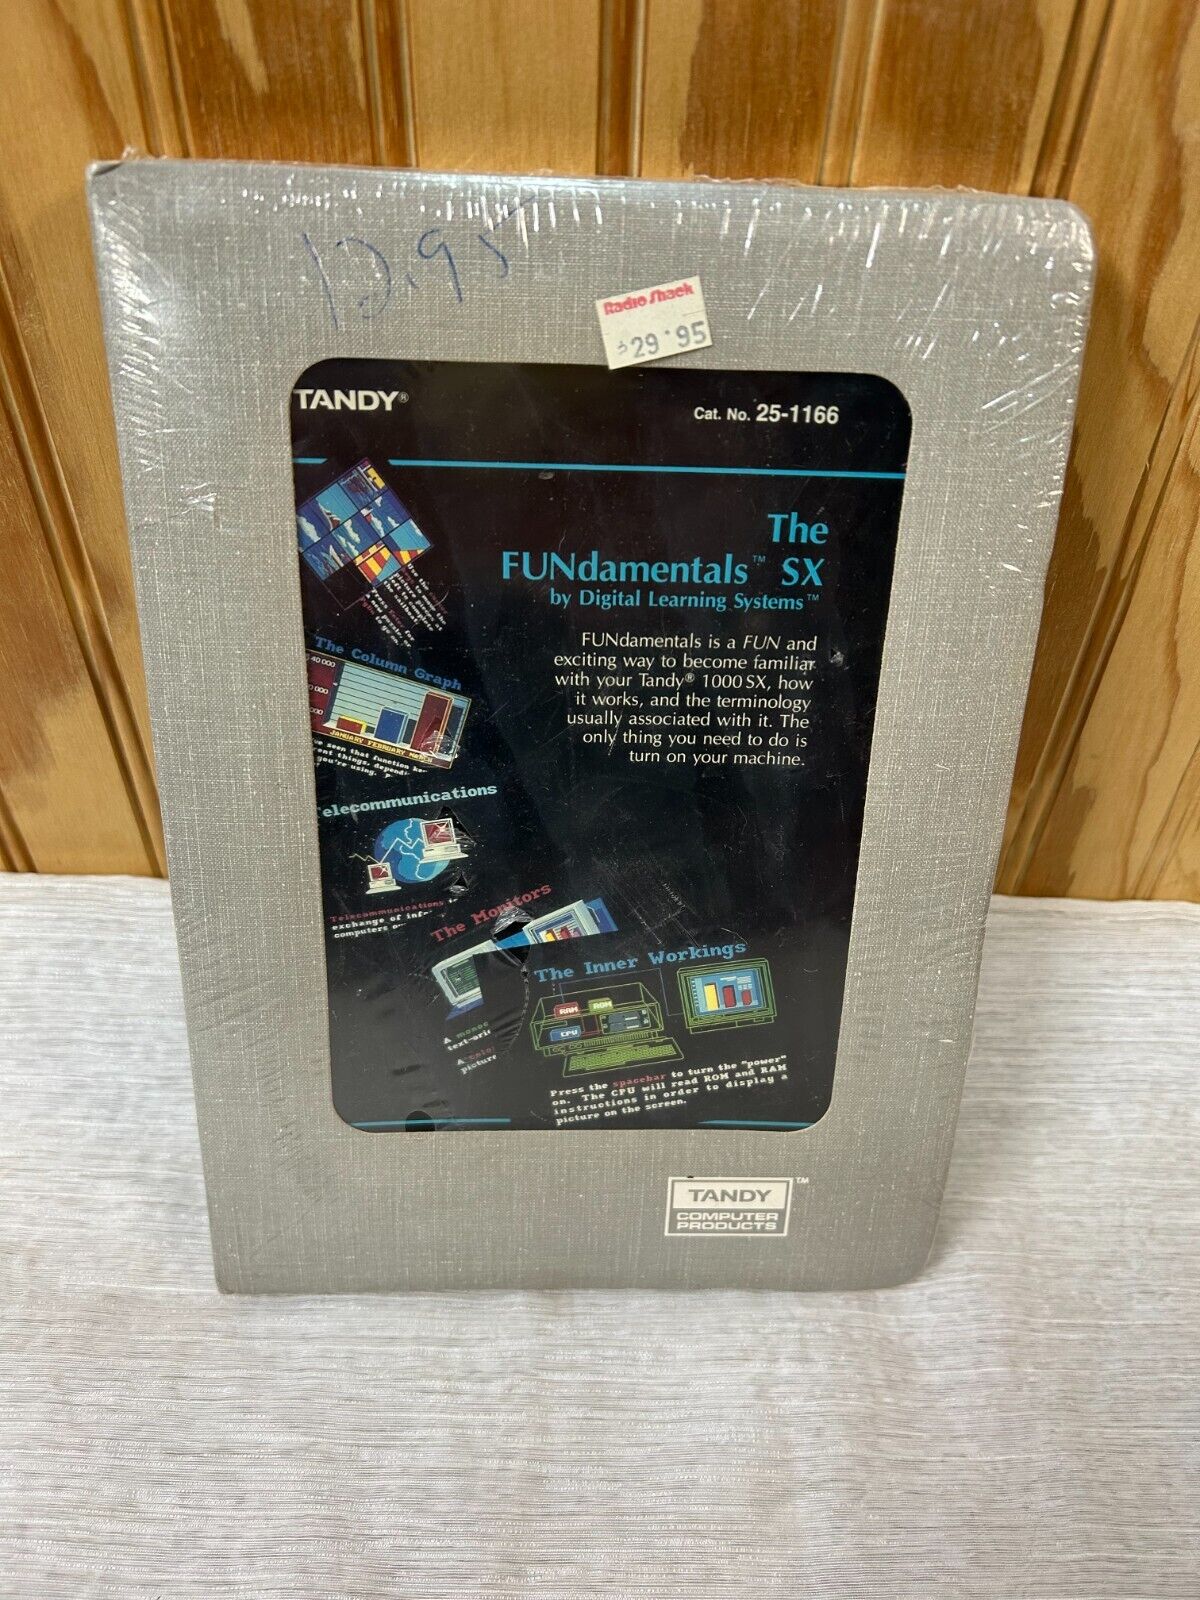 NEW Tandy The FUNdamentals SX #25-1166 Tandy Digital Learning System Sealed